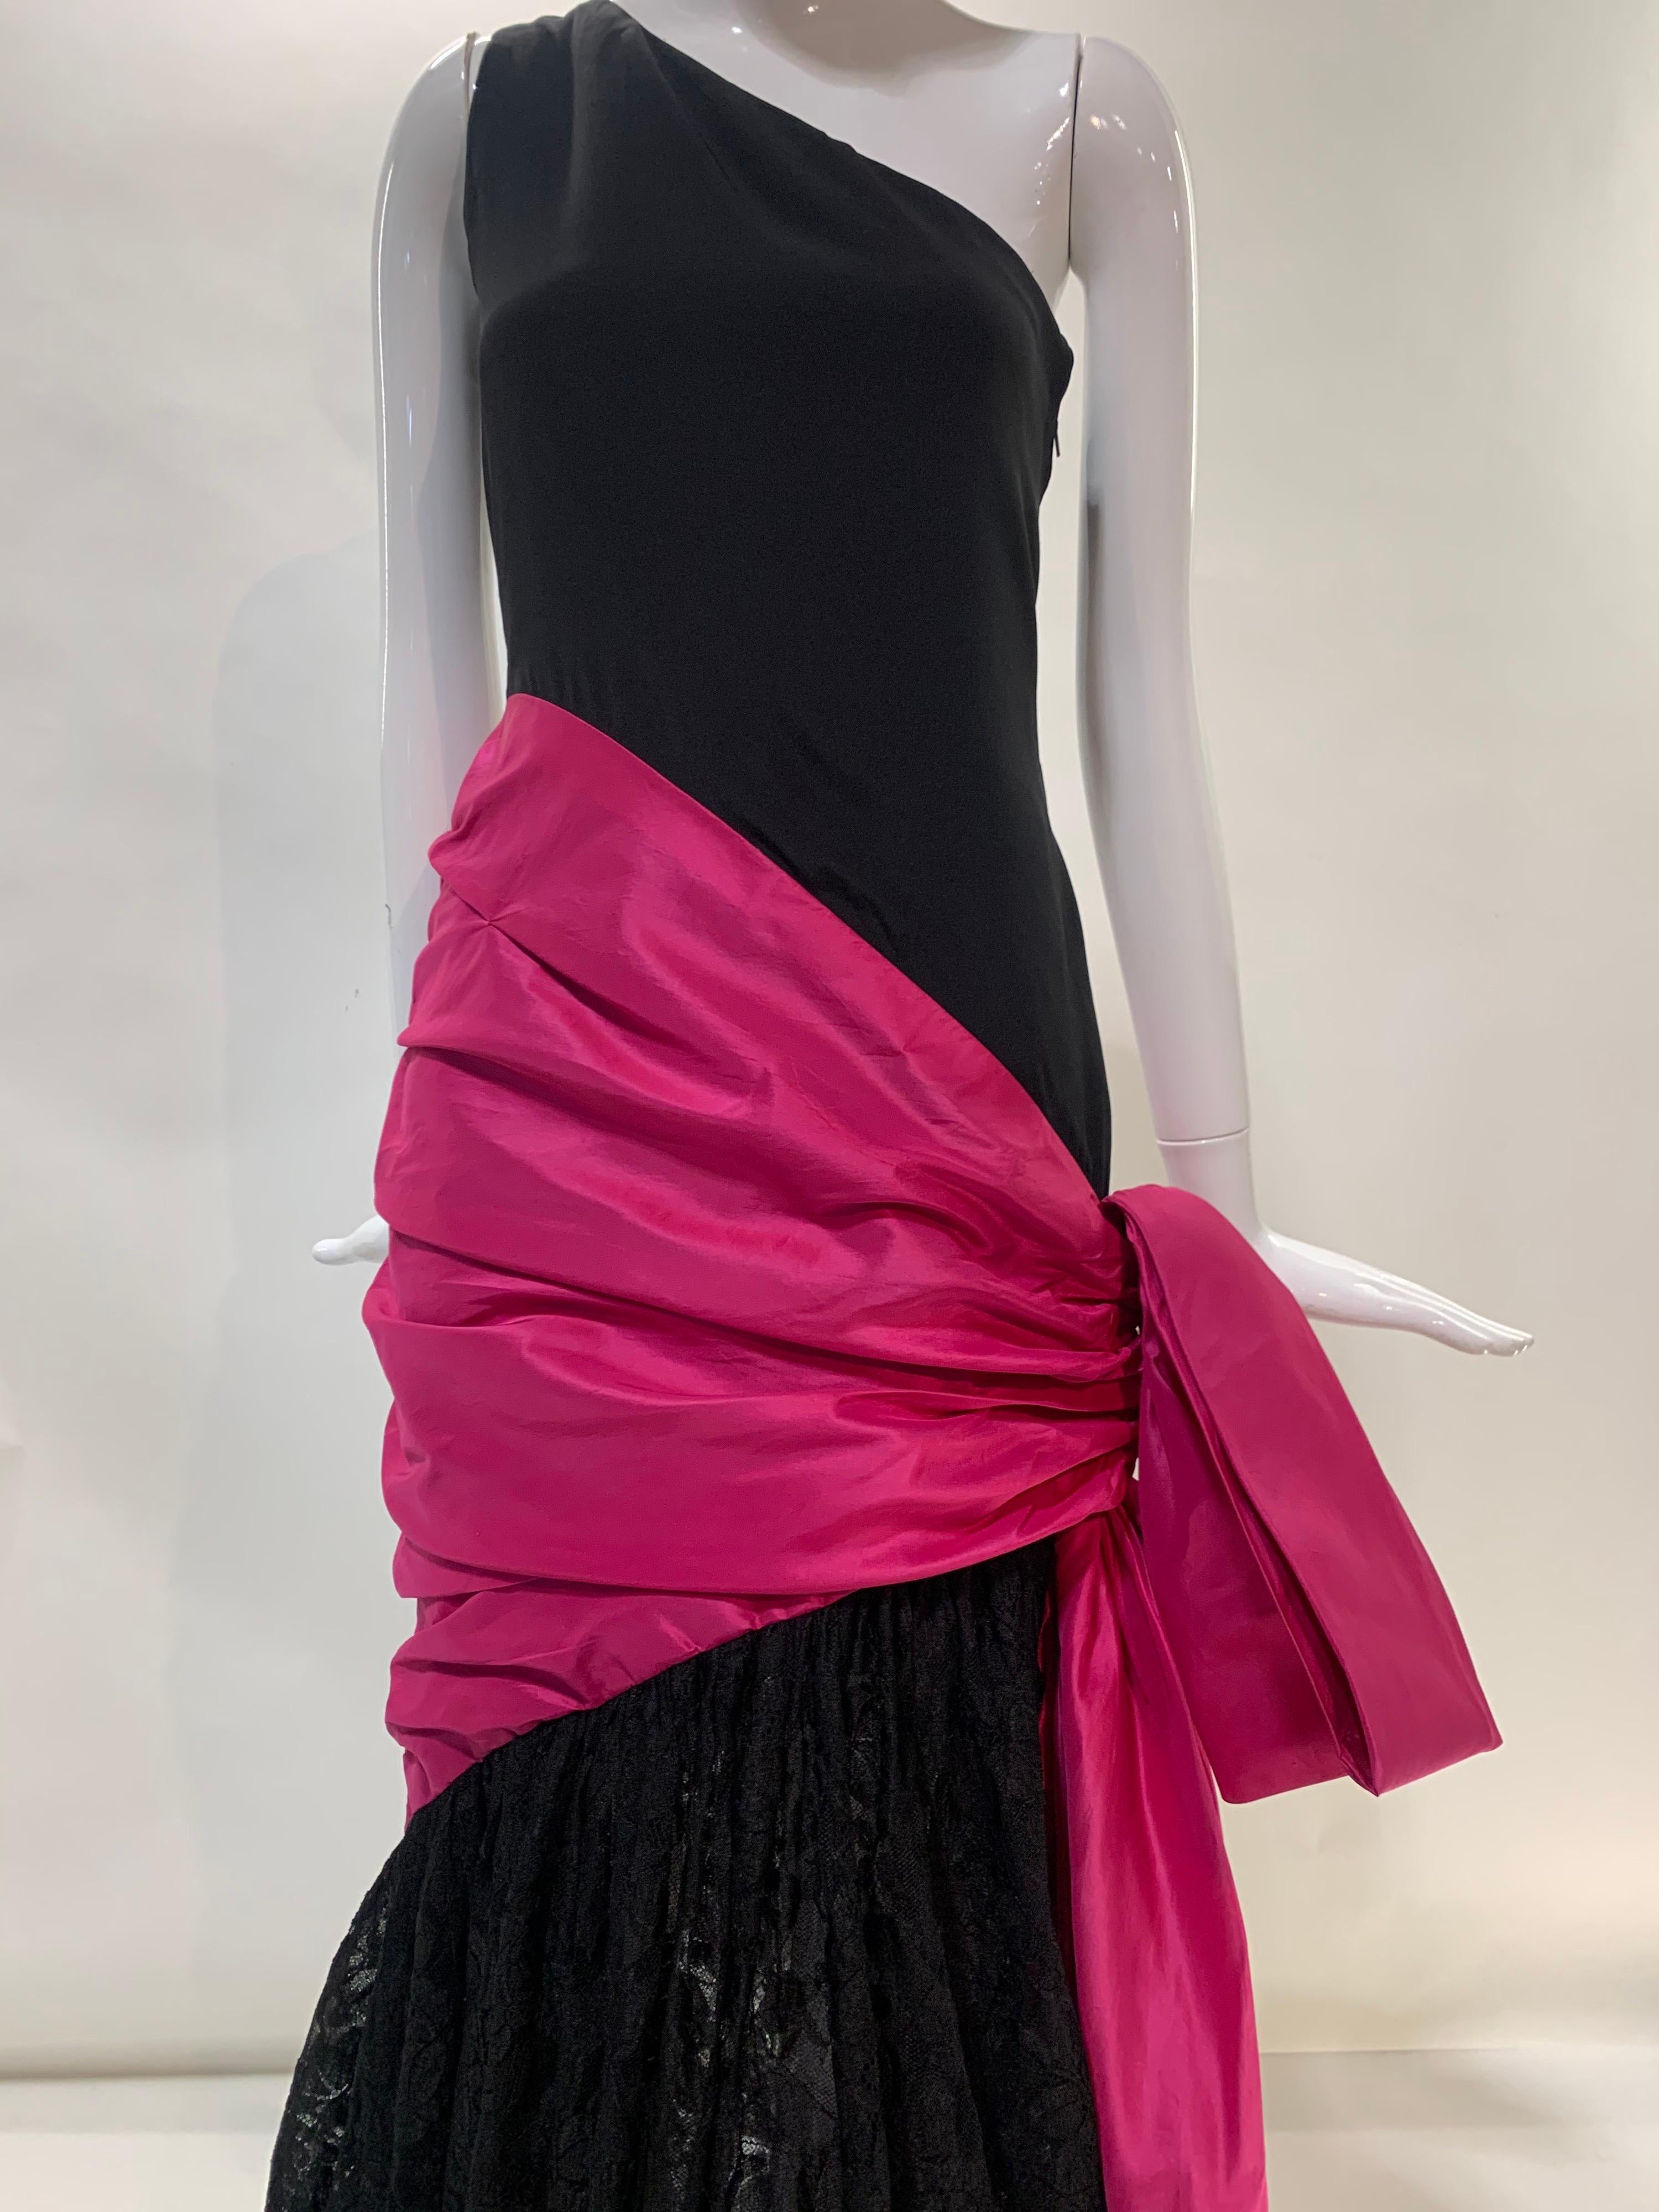 1980 Bill Blass Black Silk Crepe One-Shoulder Gown w/ Lace Skirt and Fuchsia Bow In Excellent Condition For Sale In Gresham, OR